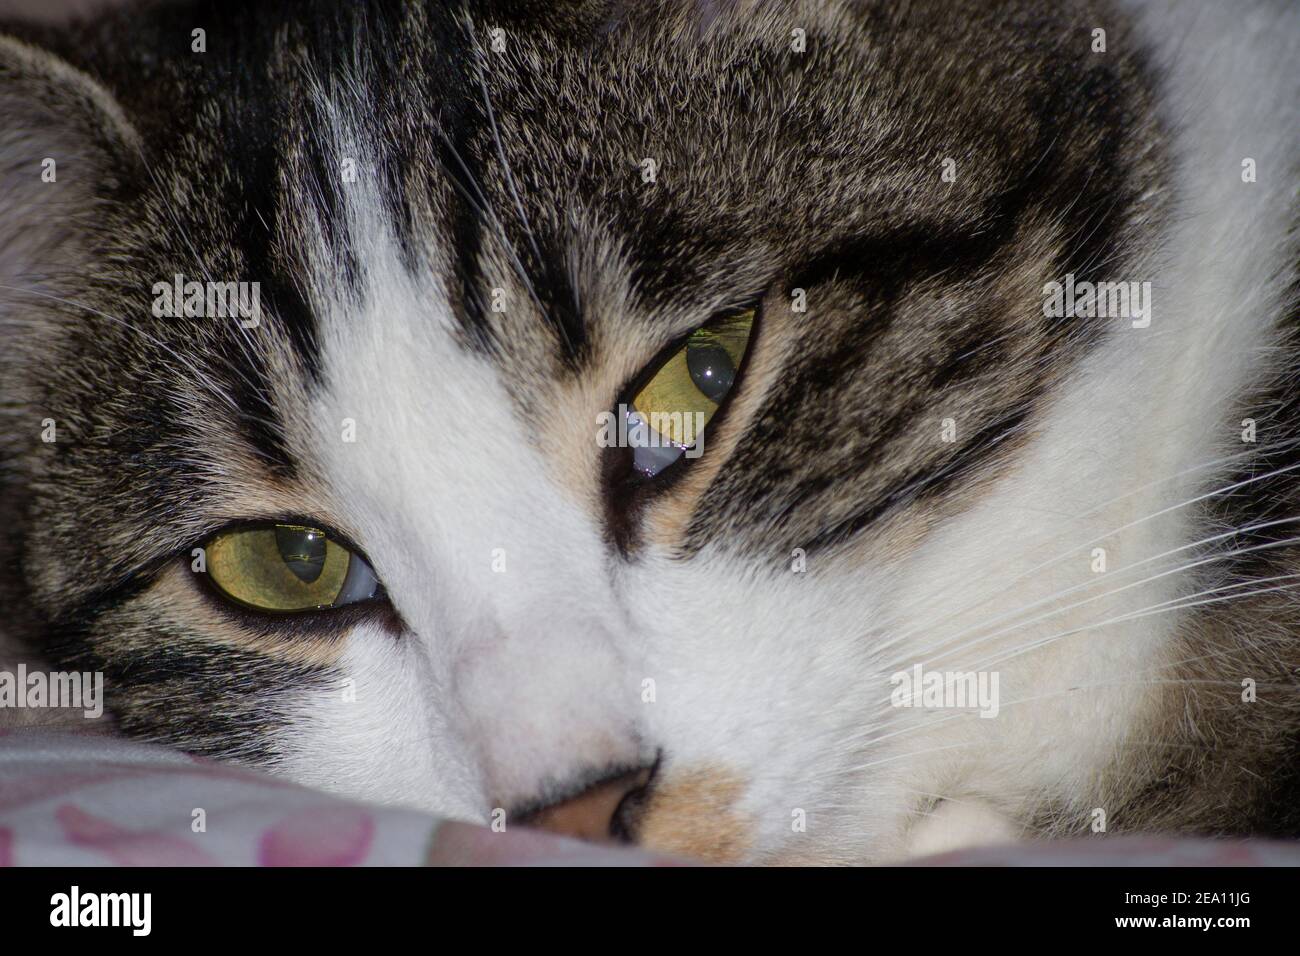 close up portrait of a cat with yellow eyes Stock Photo